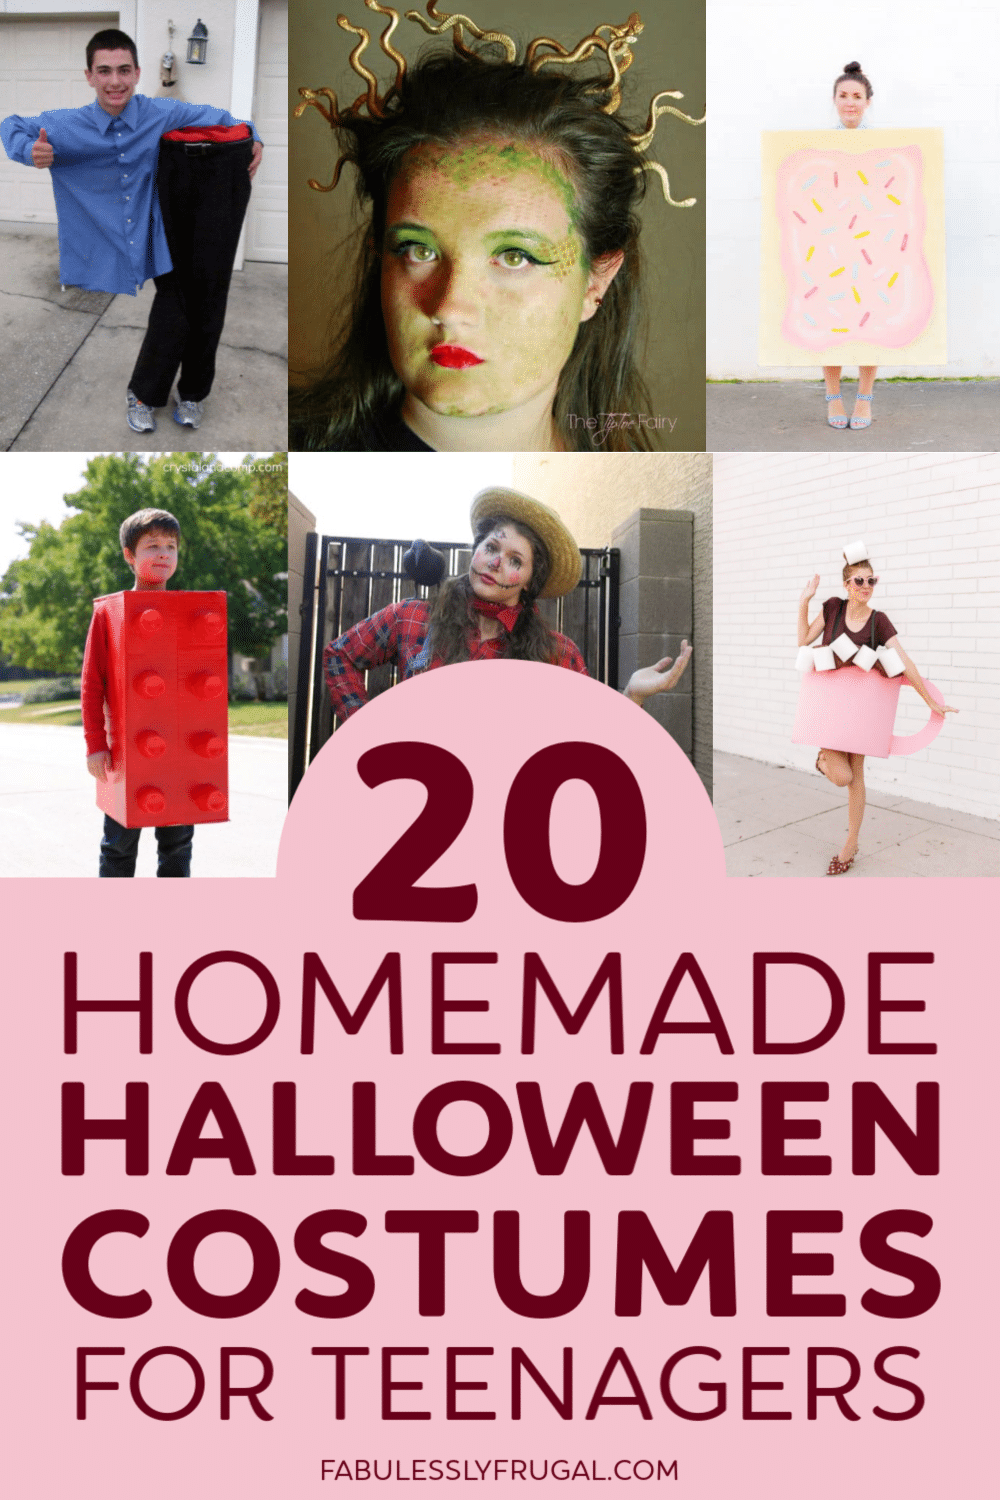 Homemade costumes for teens